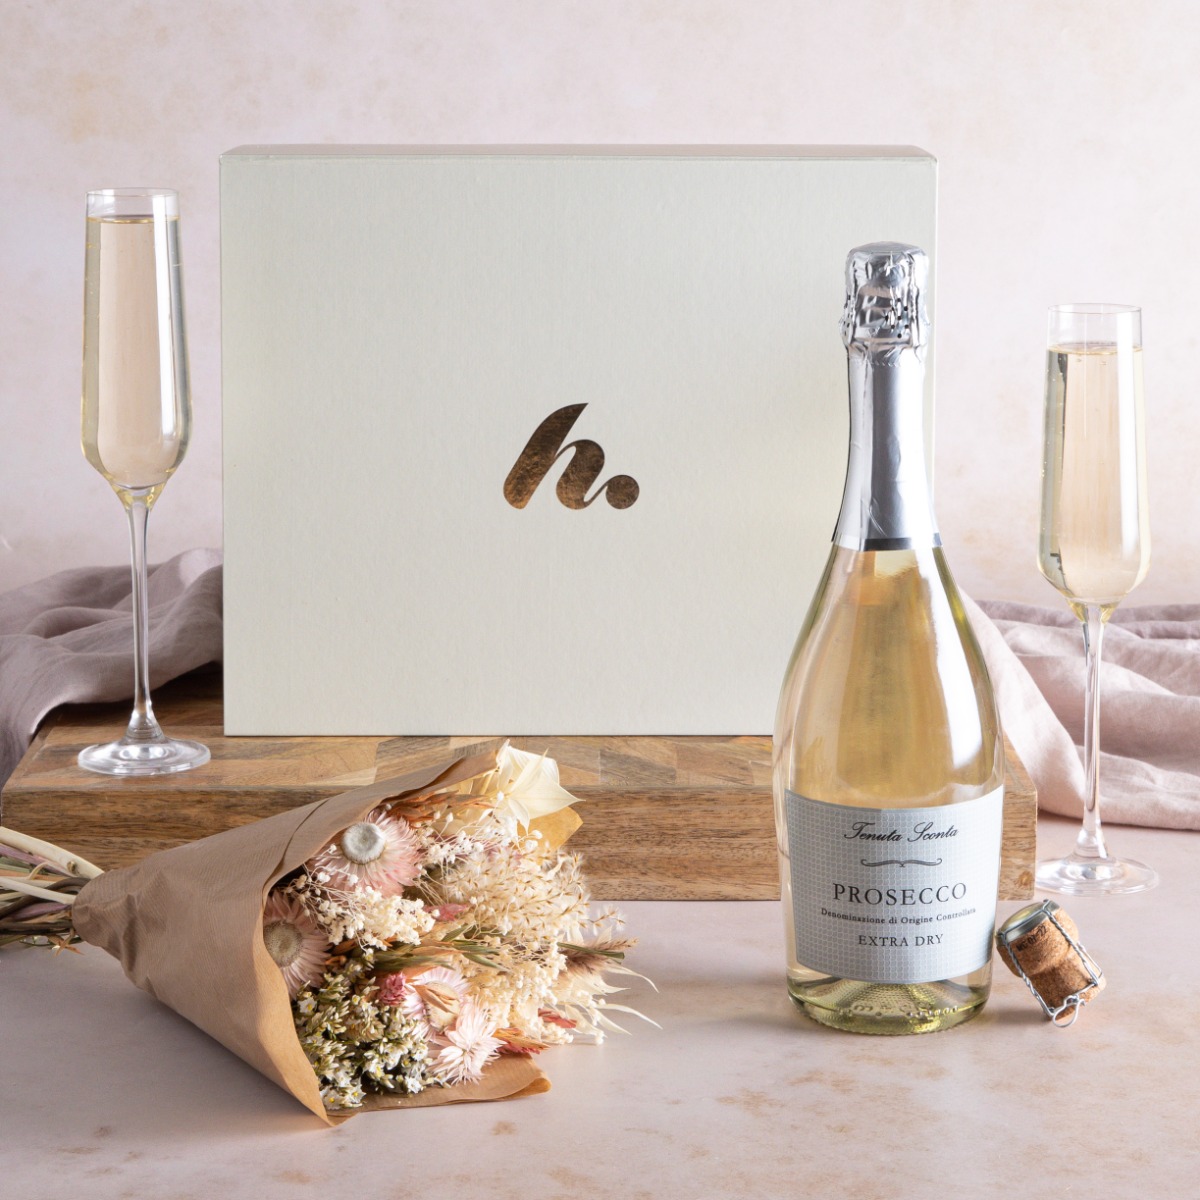 Mother's Day Prosecco & Dried Flowers Gift with contents on display